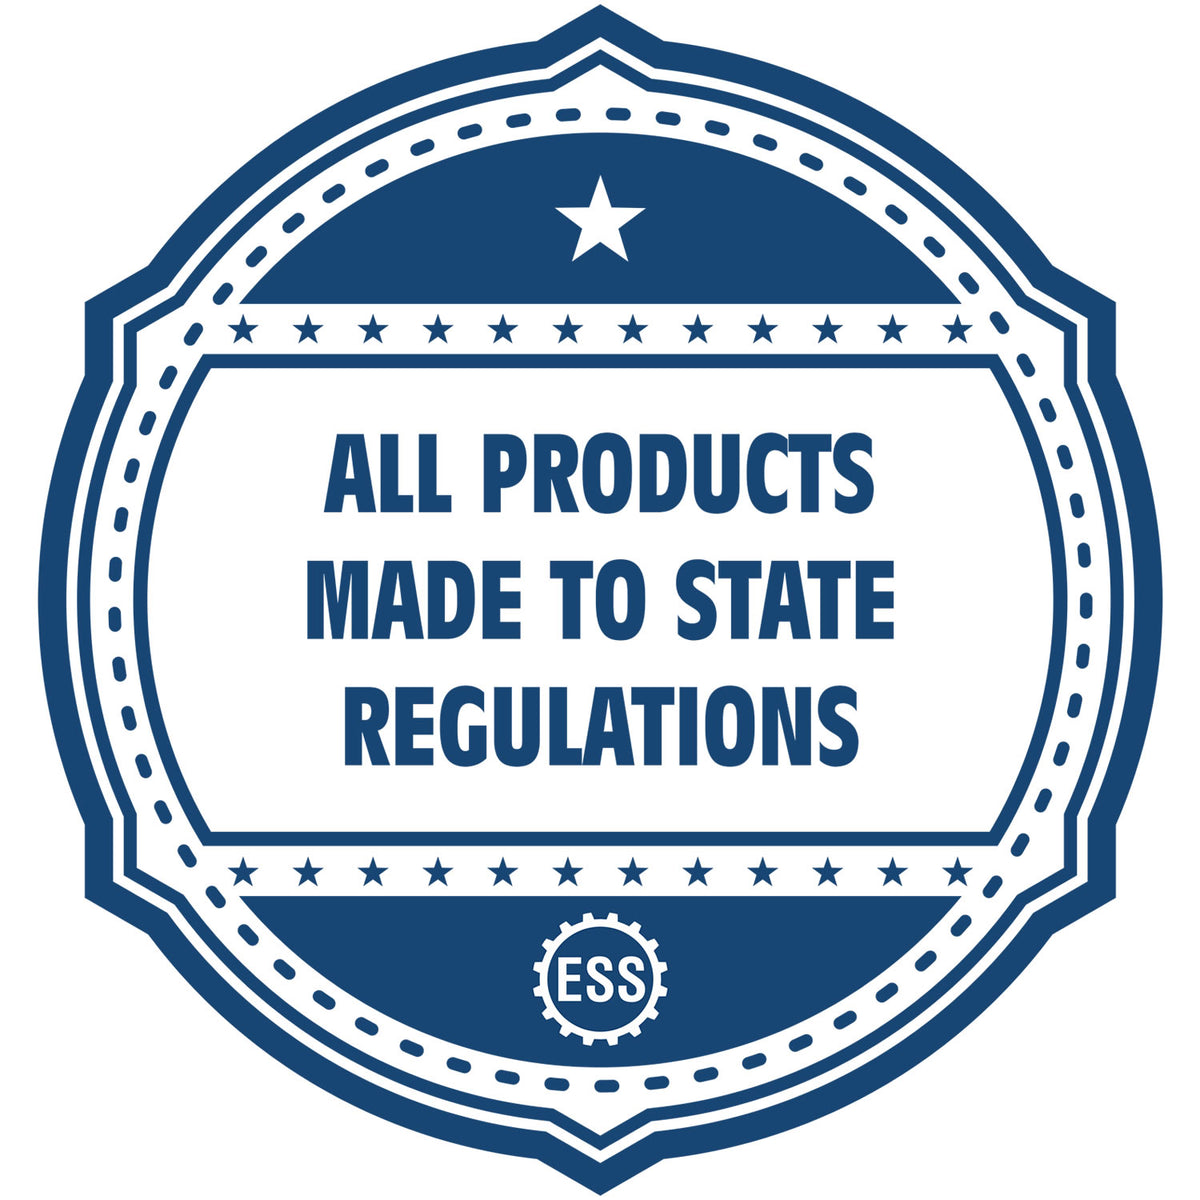 A blue icon or badge for the Hybrid Tennessee Geologist Seal showing that this product is made in compliance with state regulations.